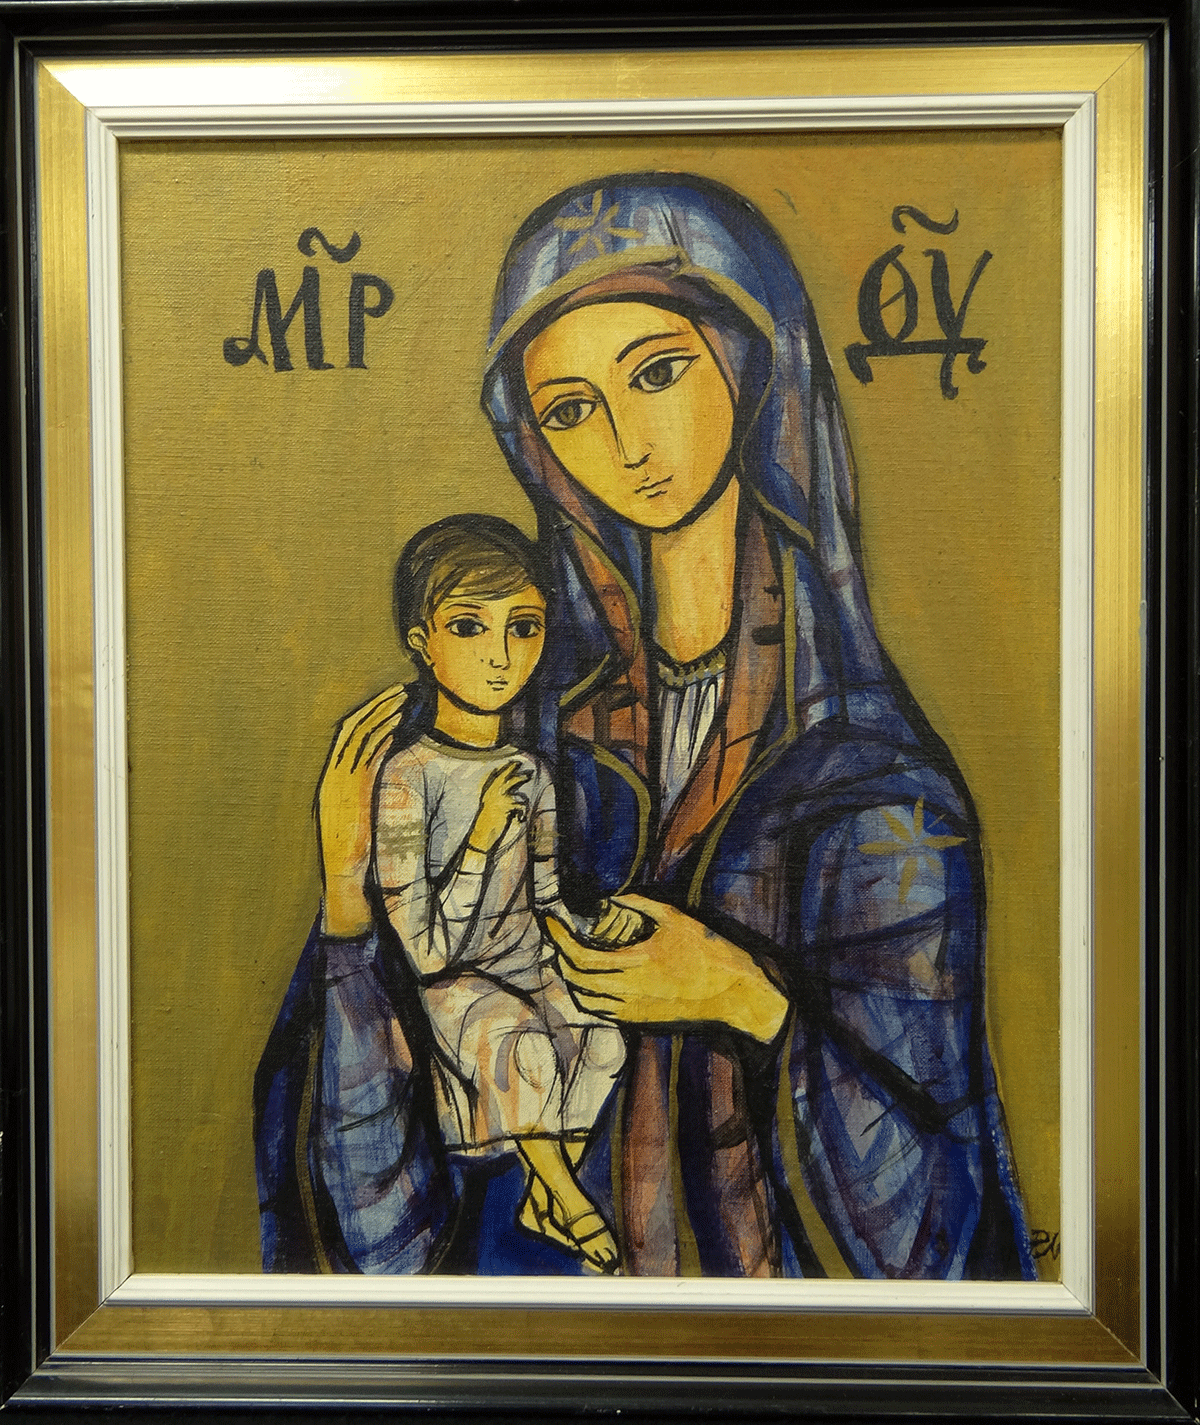 Icon of the Madonna and Child by Roxolana Luczakowsky Armstrong. Acrylic on canvas, c. 1984.